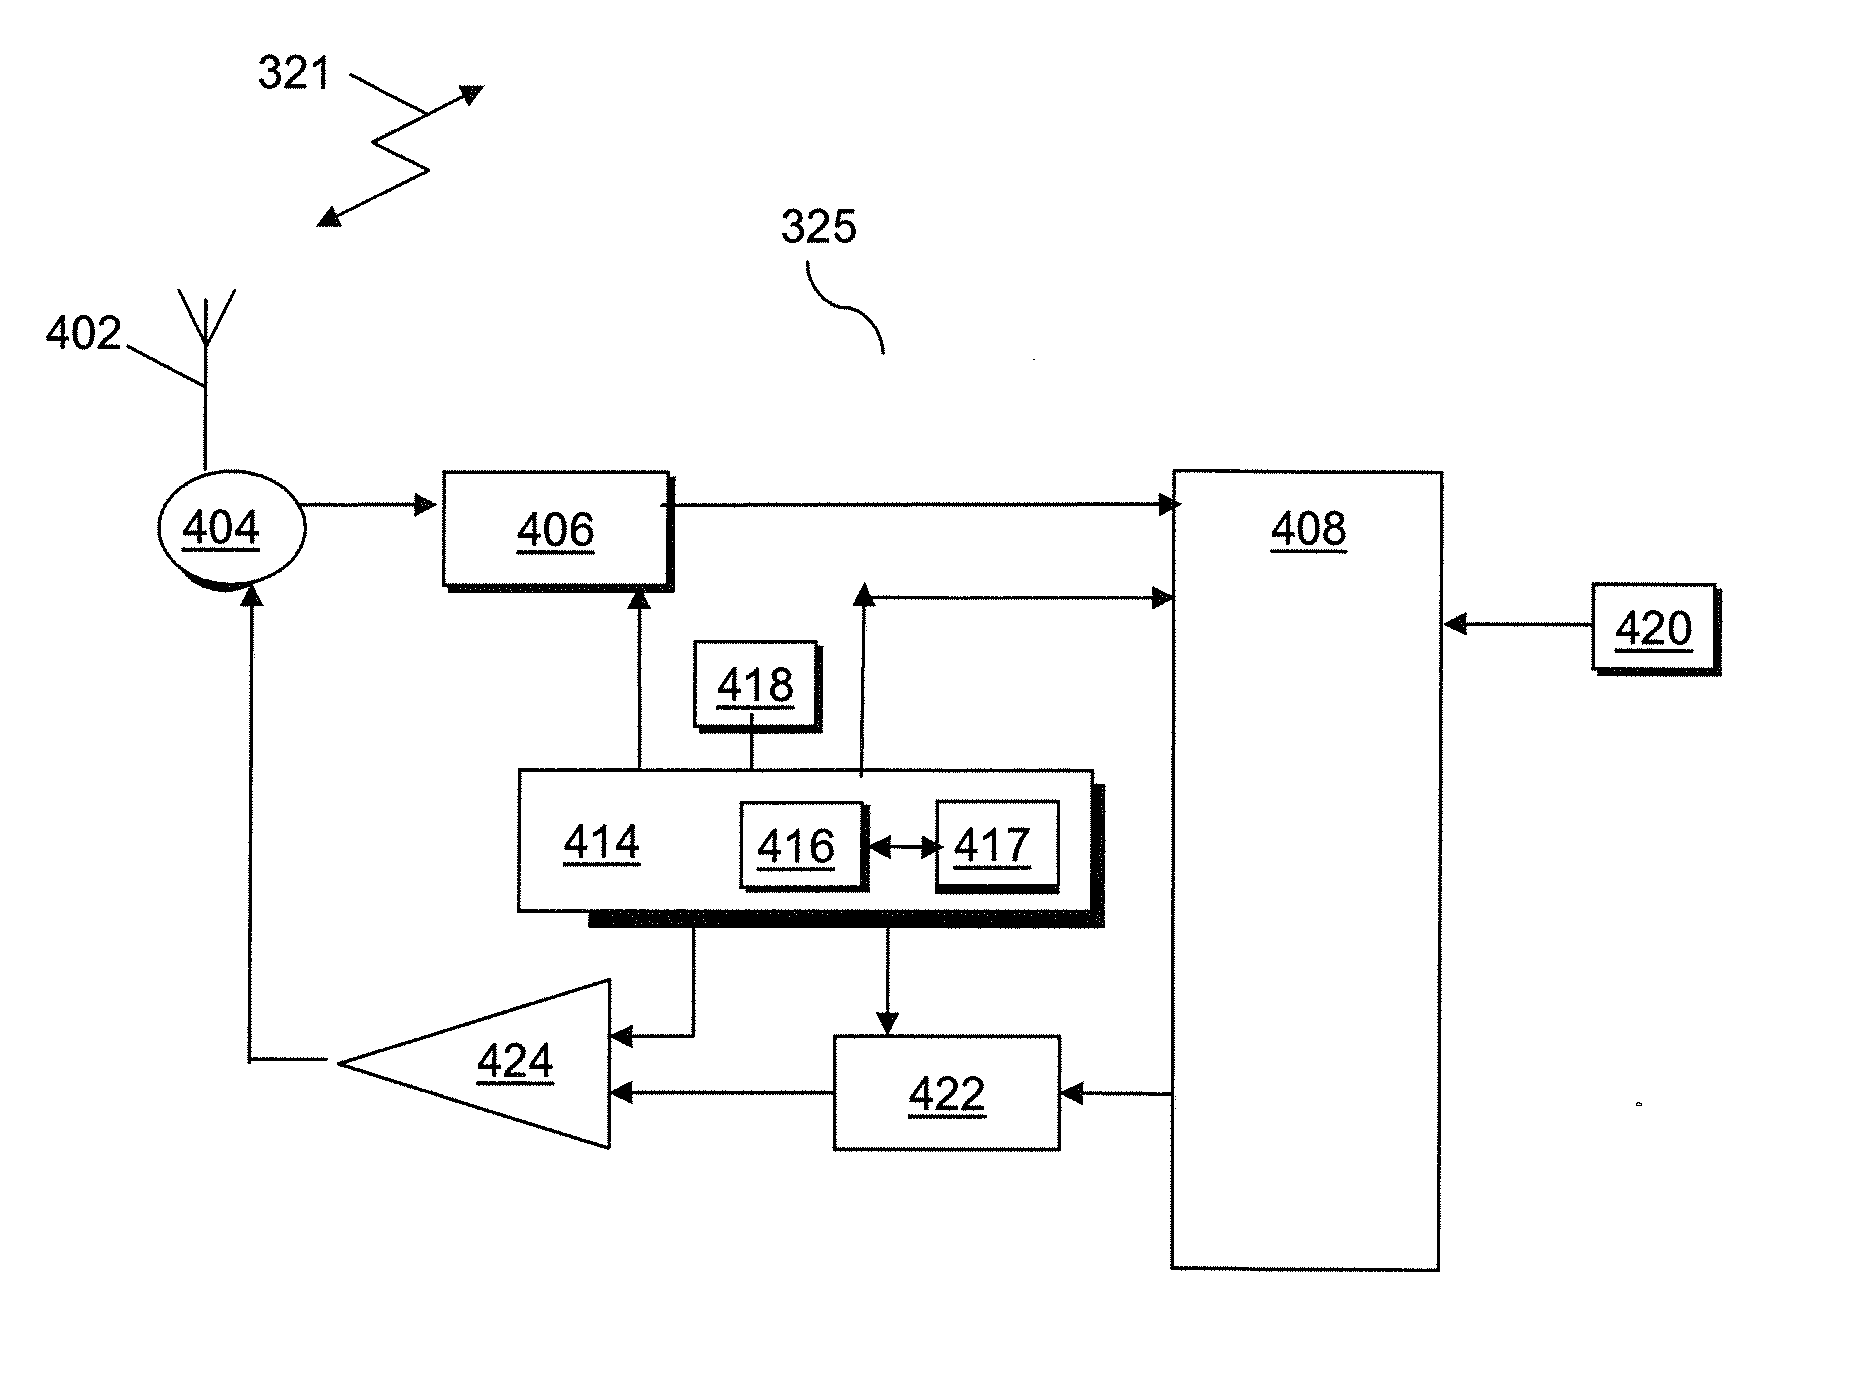 Apparatus and Methods for Key Generation